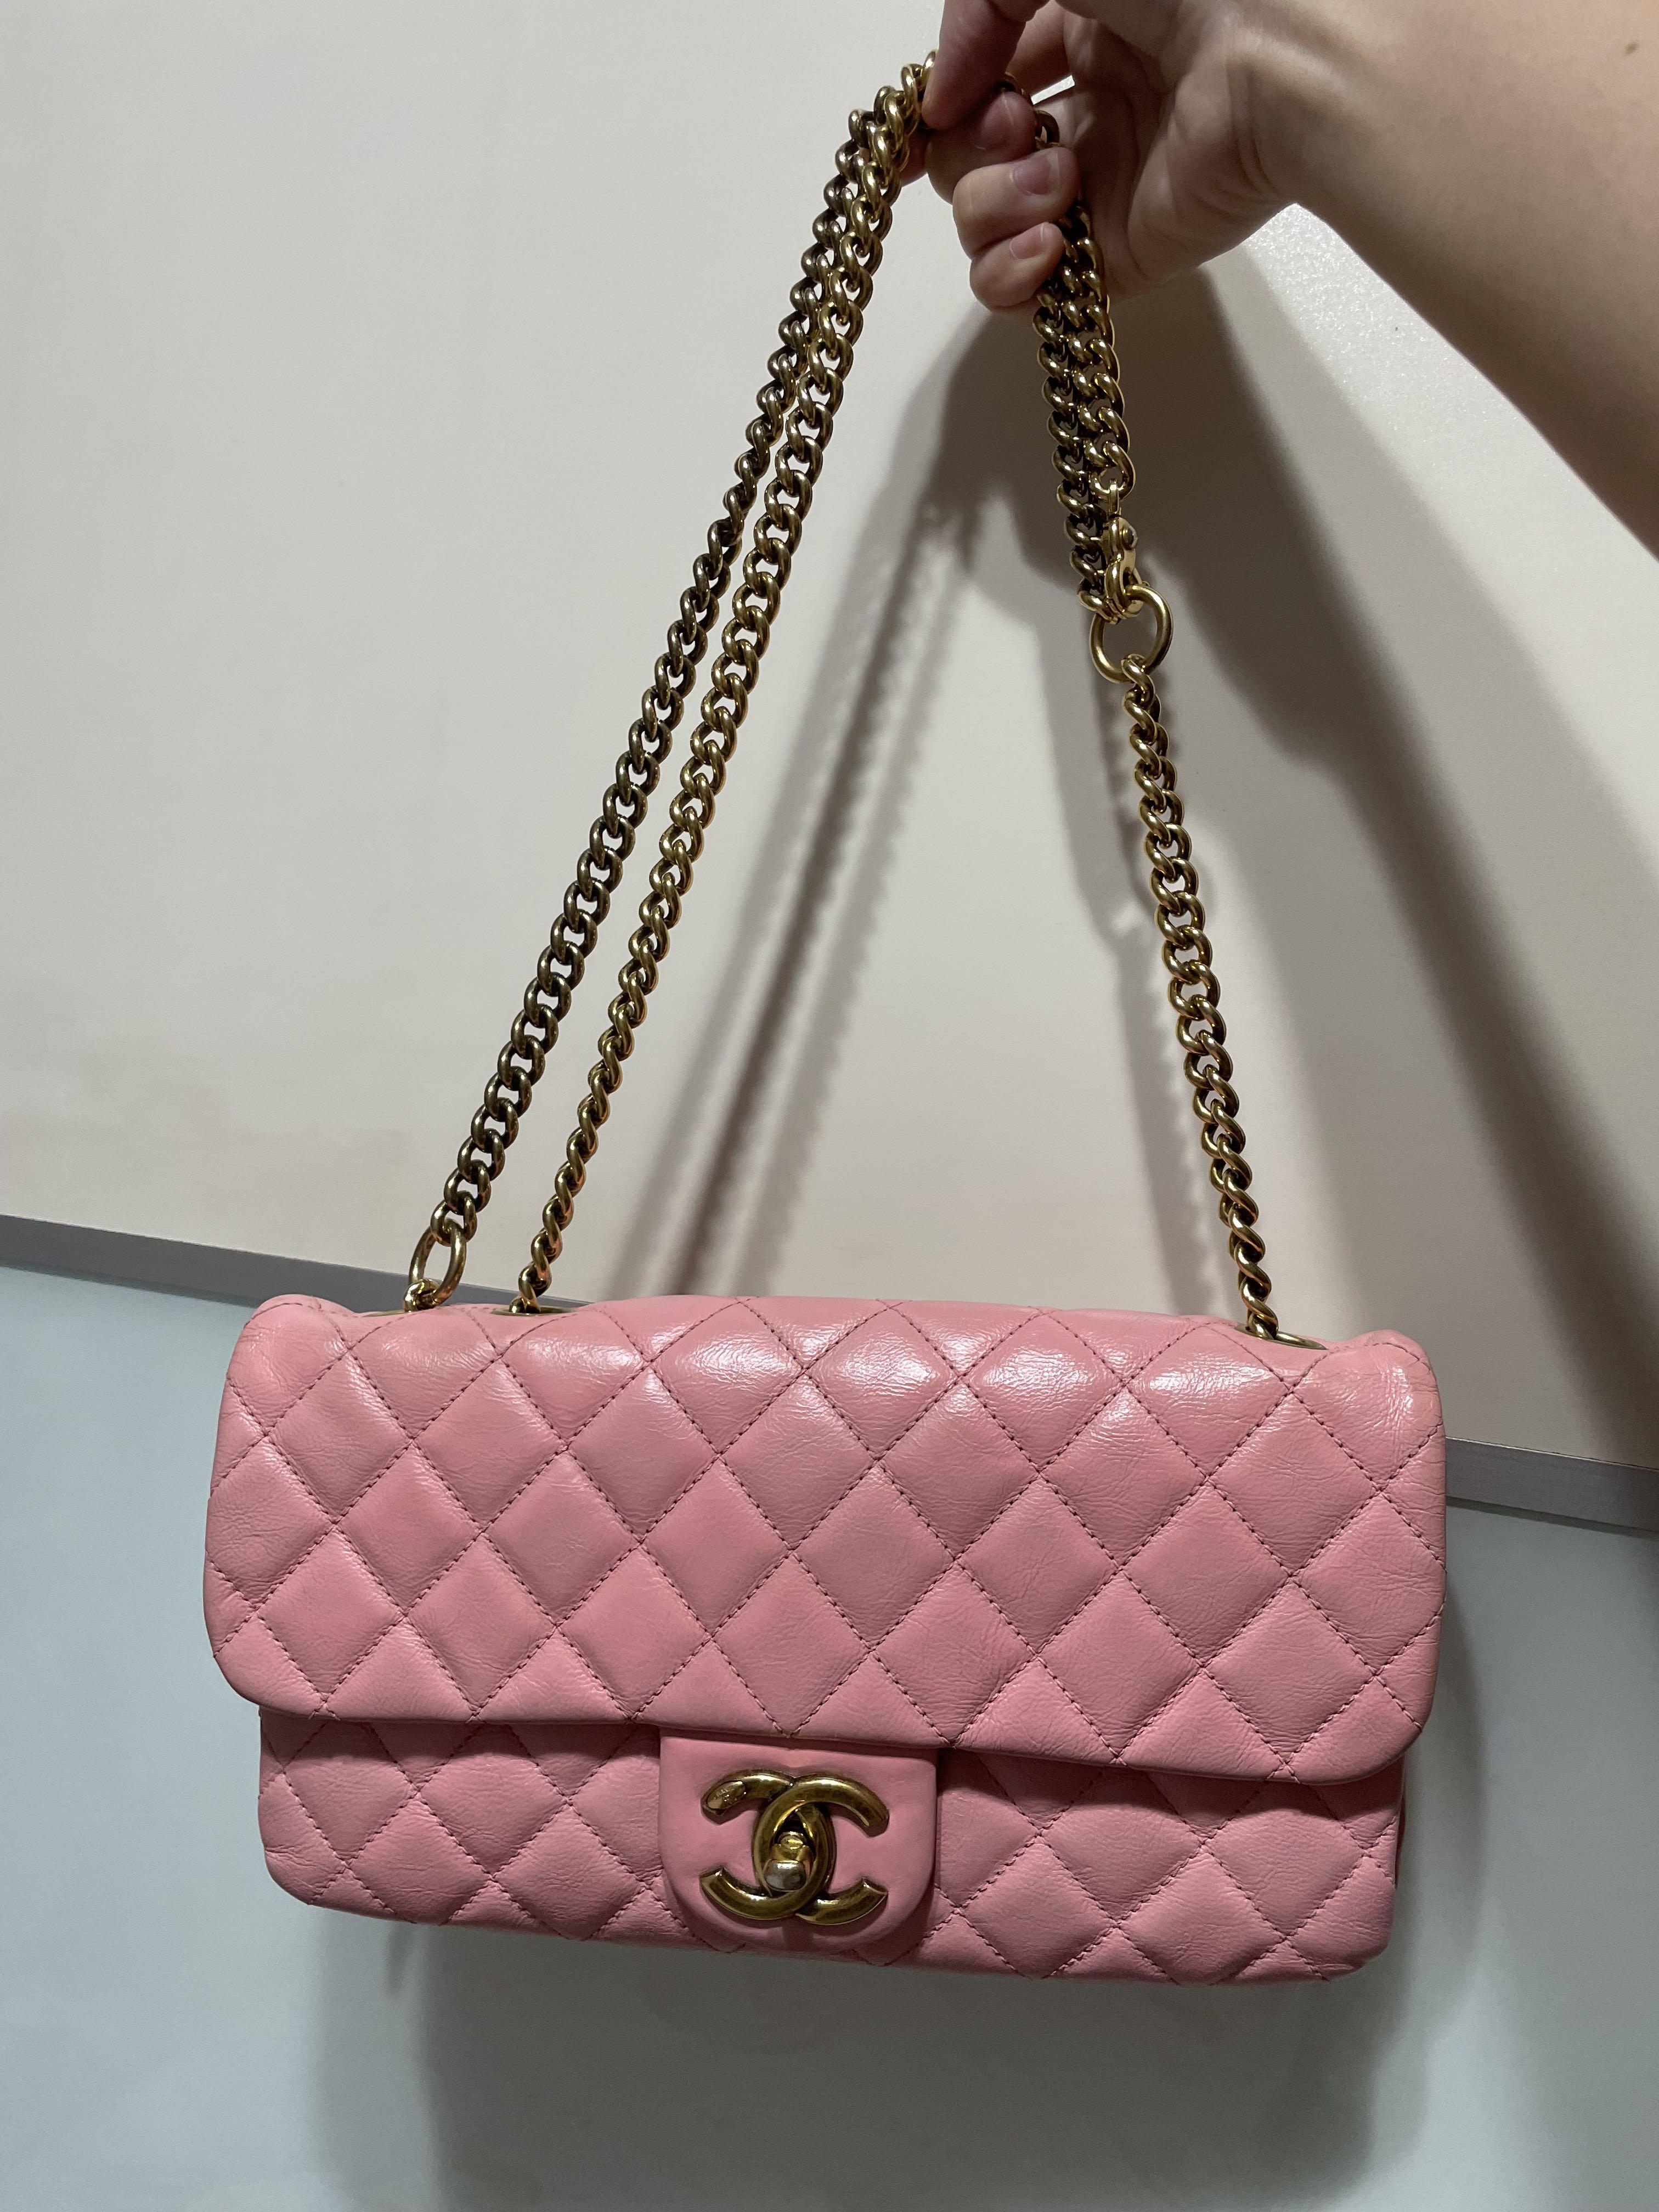 chanel pink flap